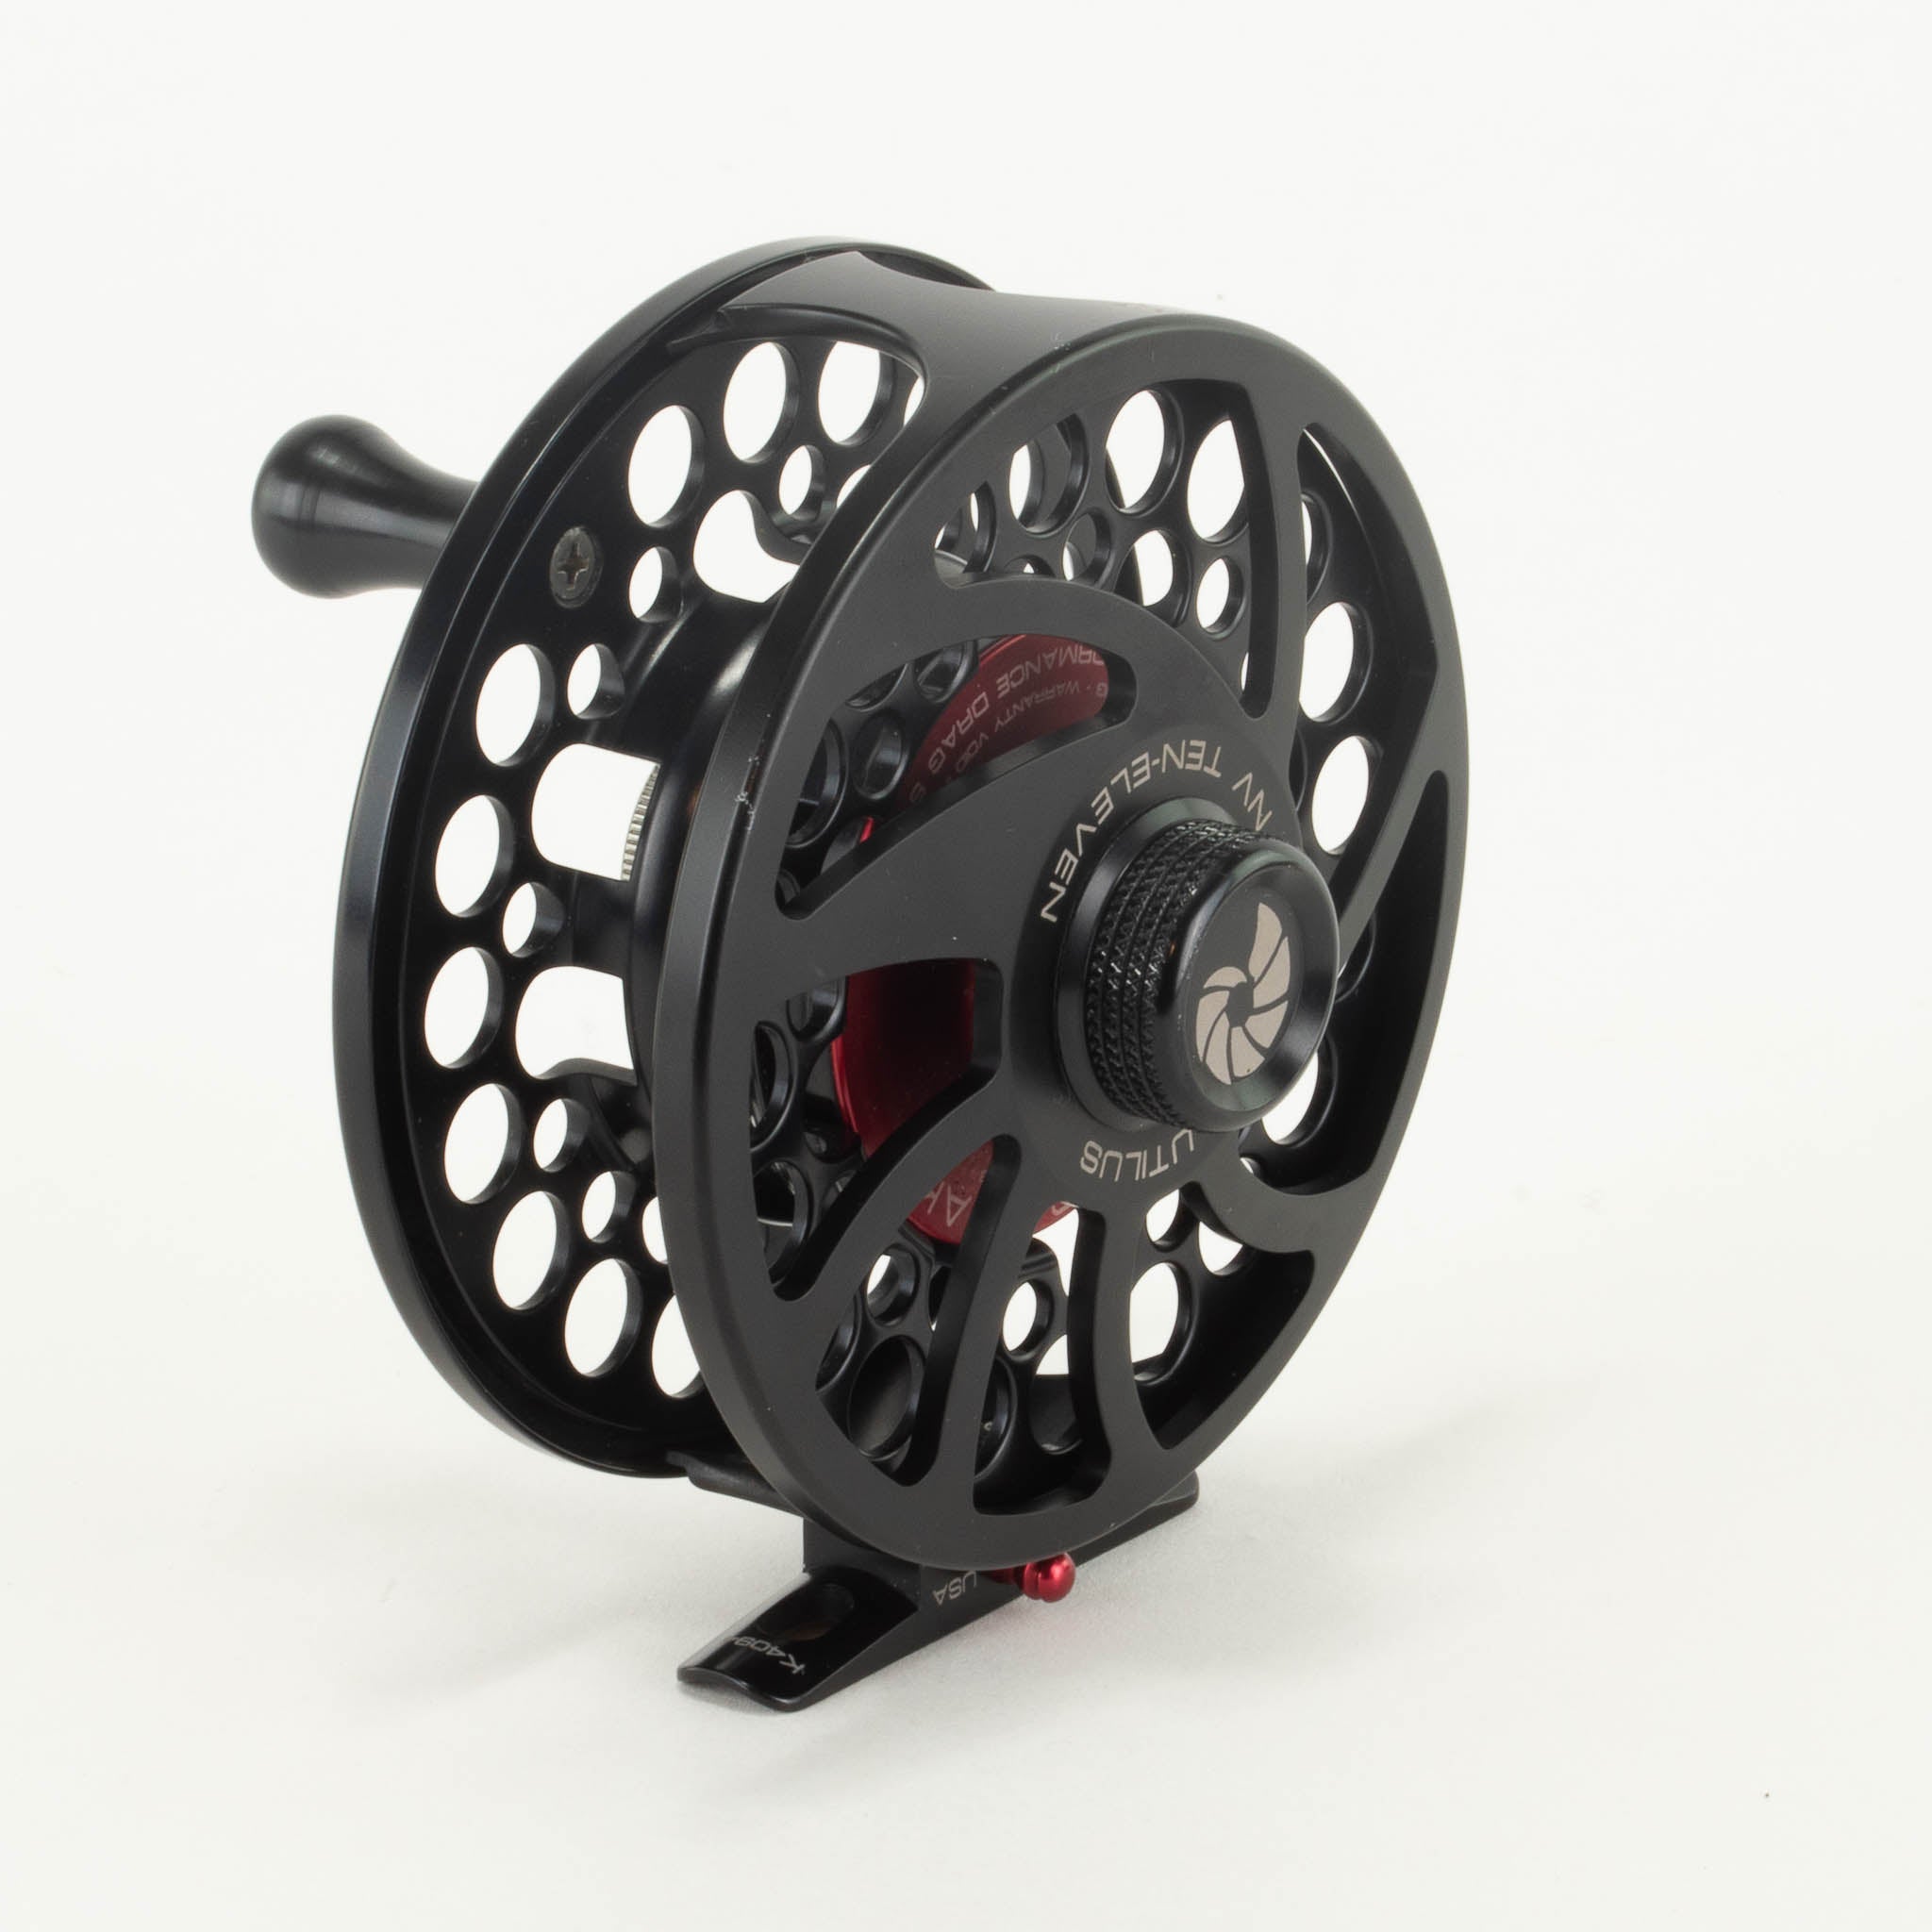 Nautilus NV 10-11 Fly Reel – Outfishers